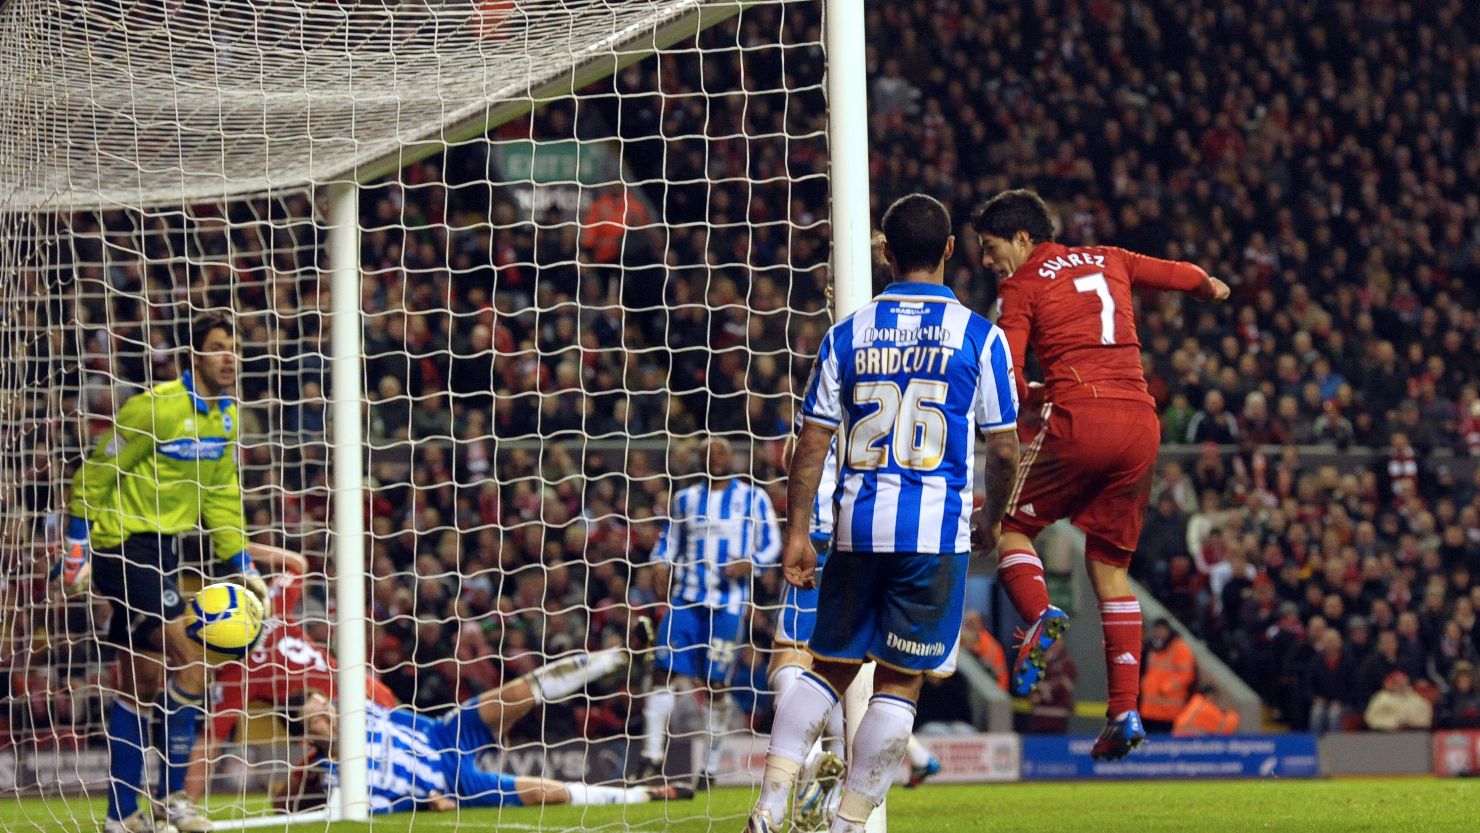 Luis Suarez scores for Liverpool as they thrashed second-tier Brighton 6-1 in the FA Cup.